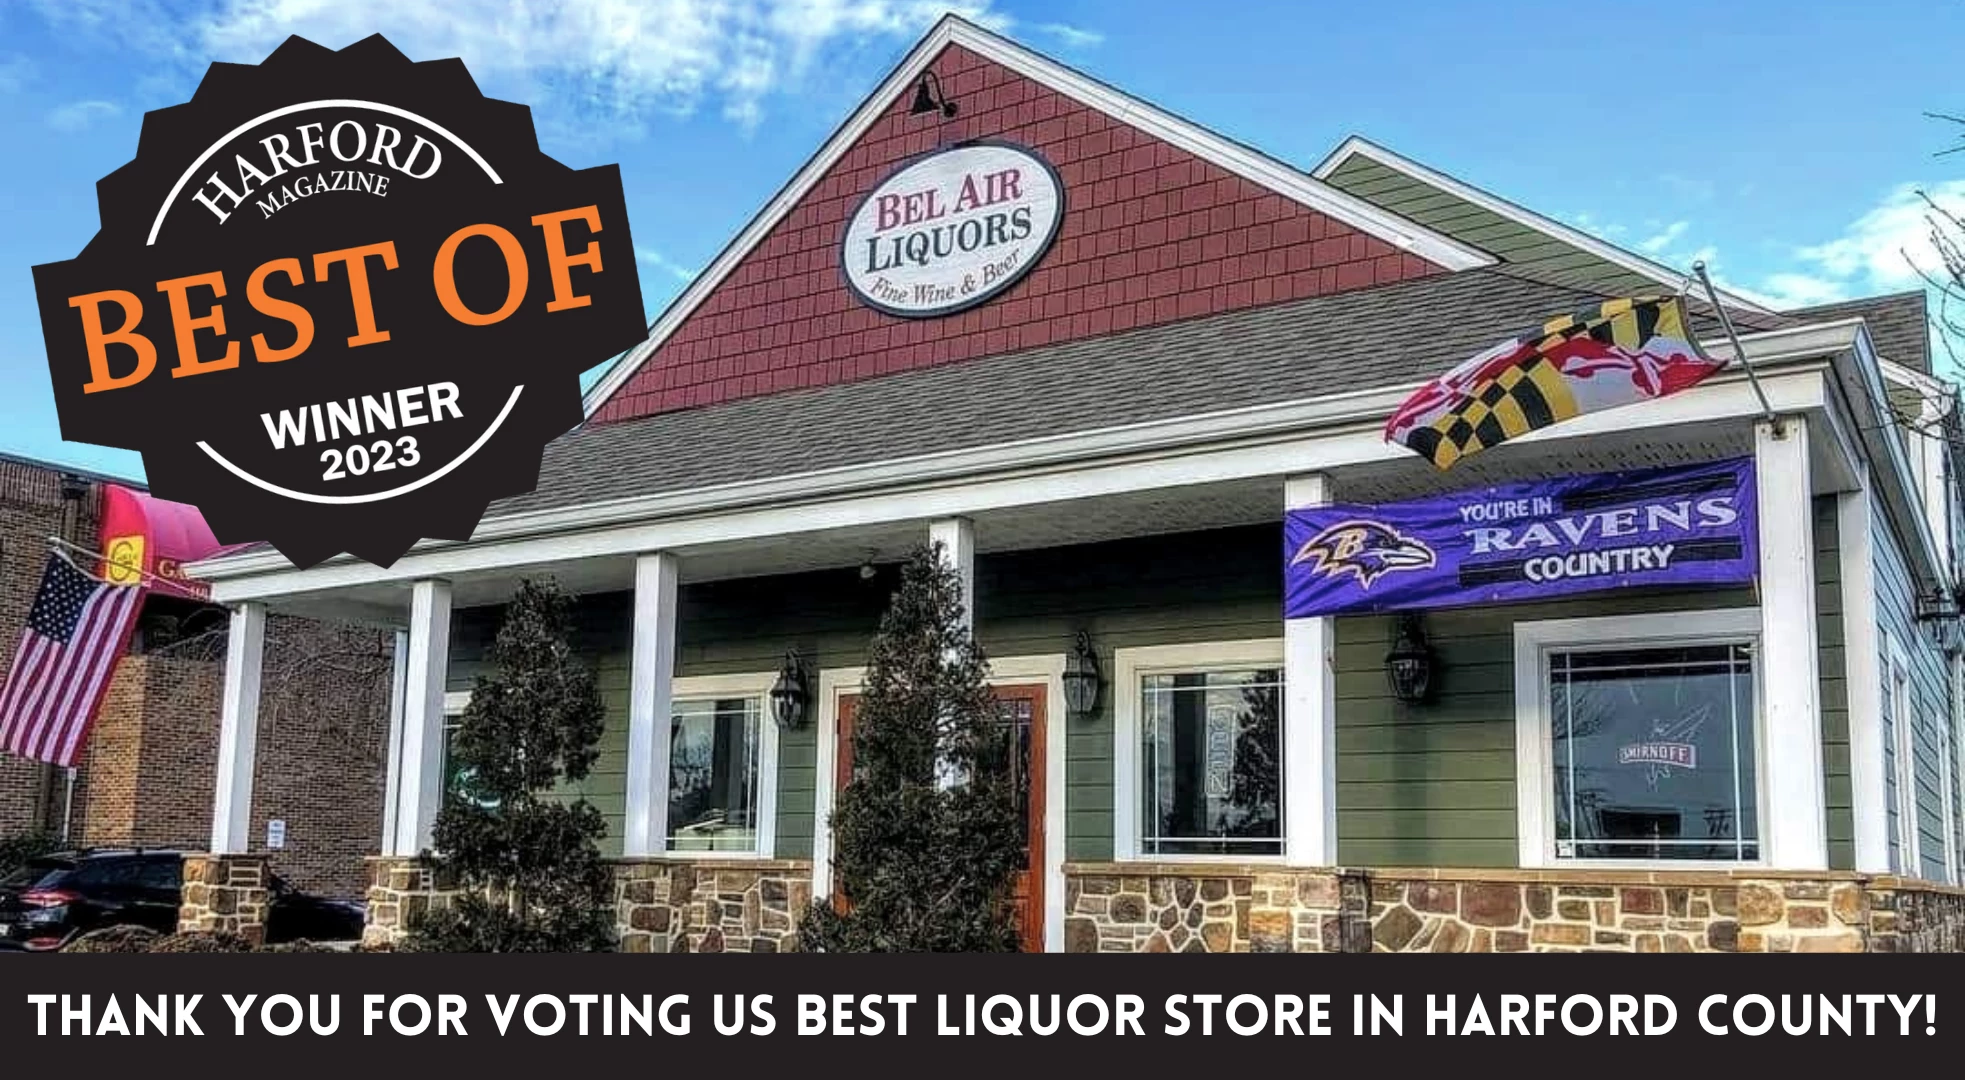 THANK YOU FOR VOTING US BEST LIQUOR STORE IN HARFORD COUNTY!